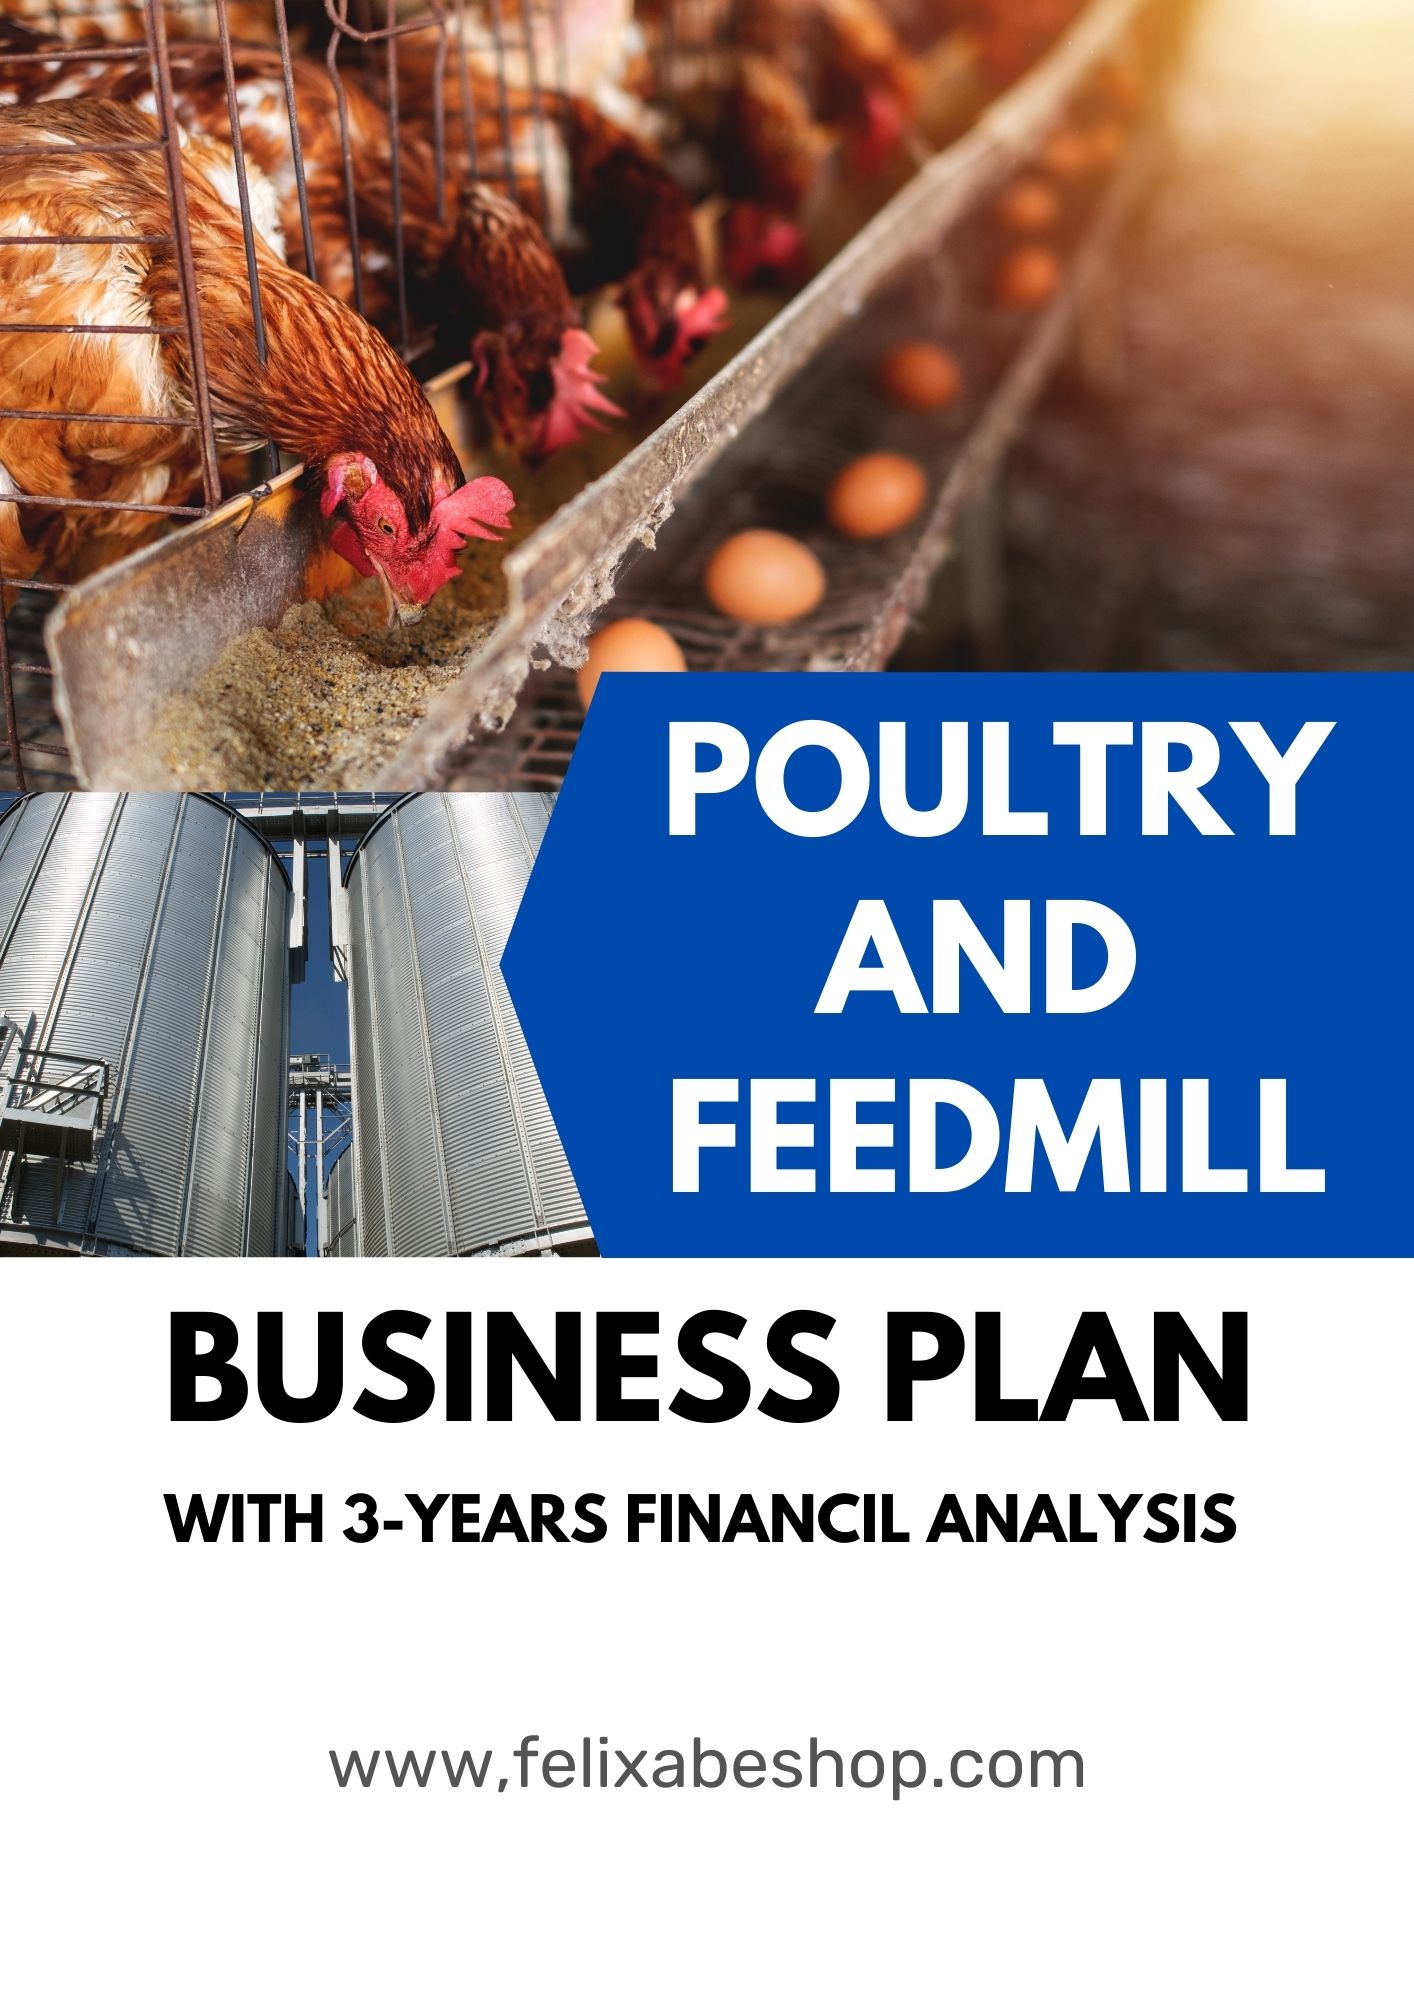 poultry feed business plan pdf